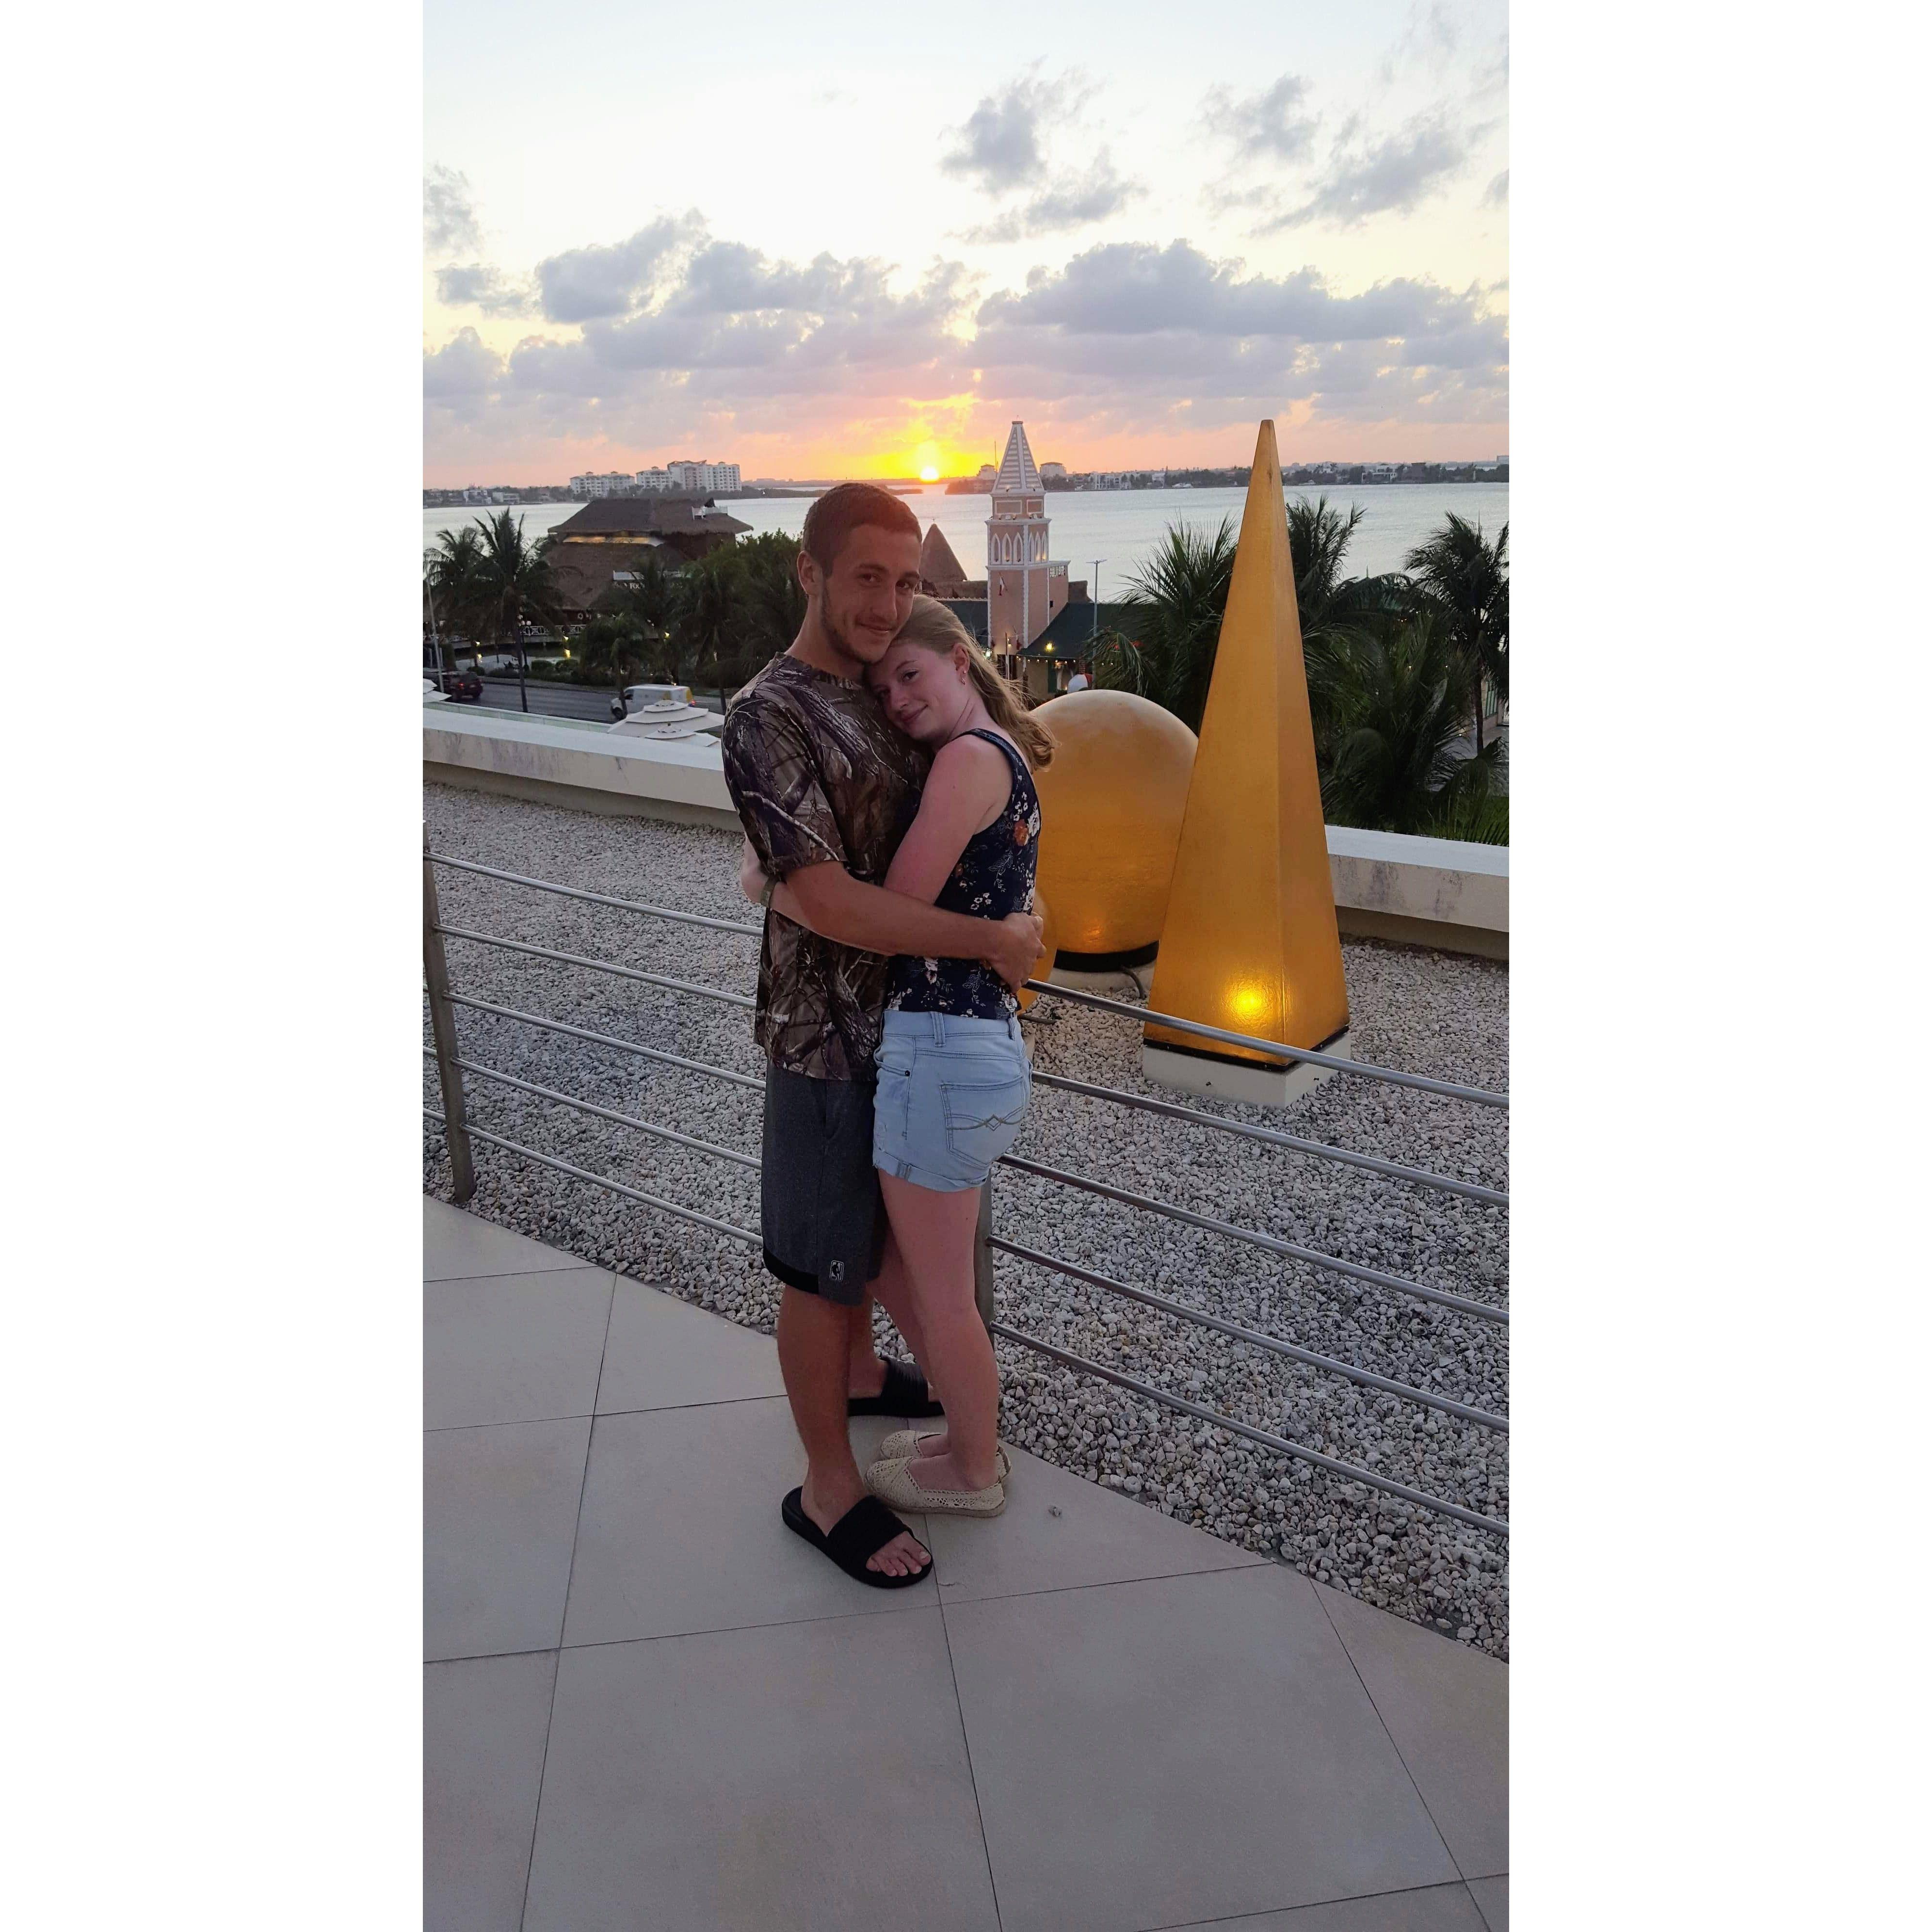 The couple got to go on a trip to Cancun Mexico with Emma's family. It is the couples favorite vacation. A week on the beach gave them many experiences.